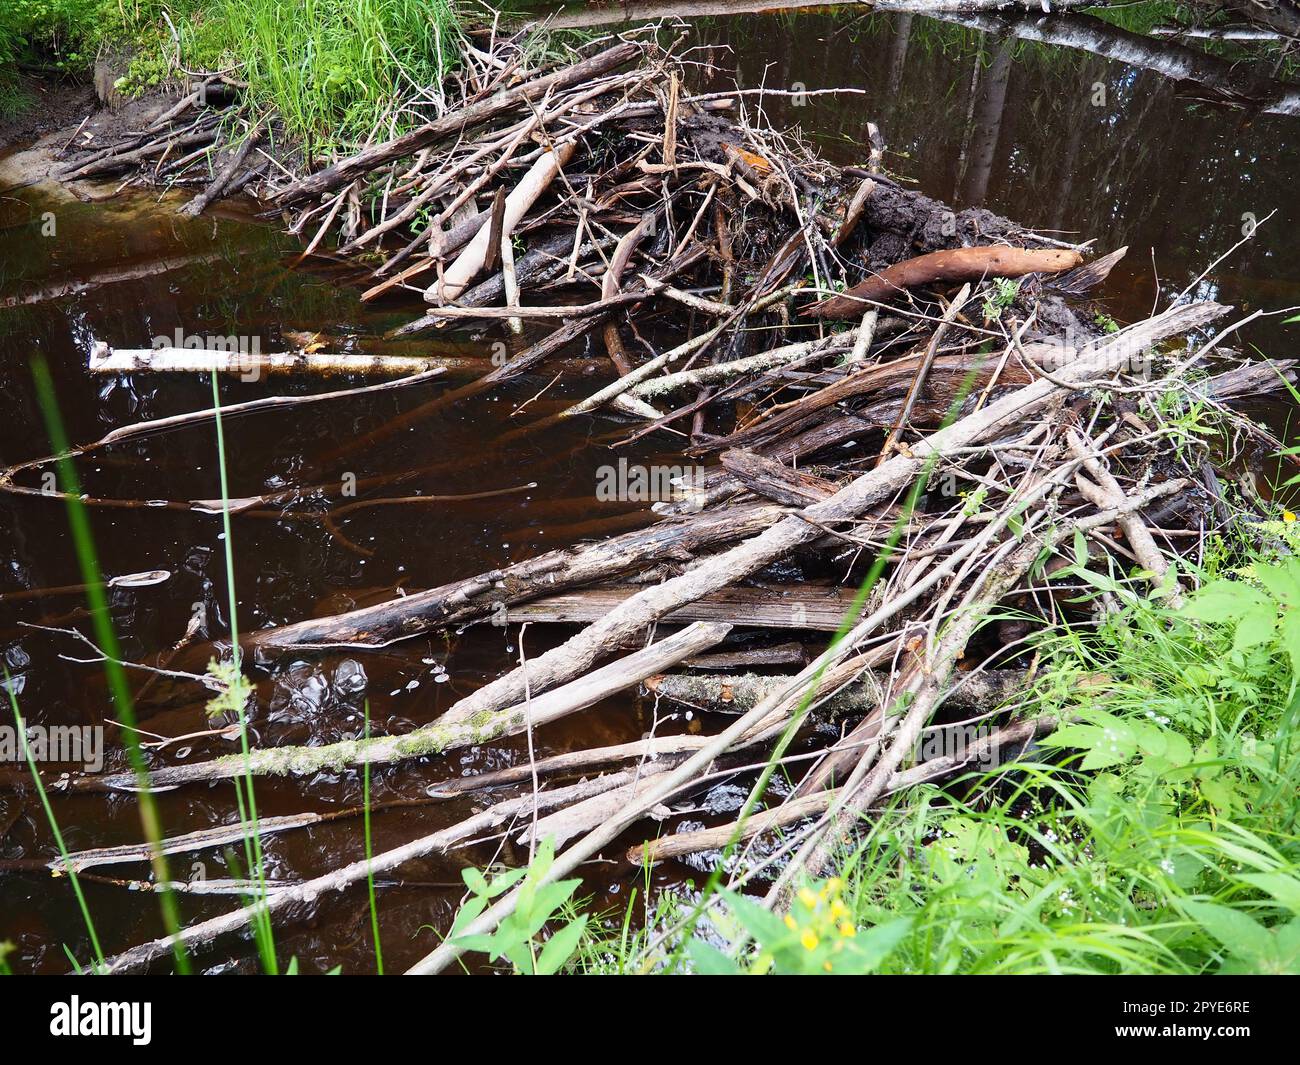 A beaver dam erected by beavers on a river or stream to protect against predators and to facilitate foraging during the winter. The dam materials are wood, branches, leaves, grass, silt, mud, stones Stock Photo